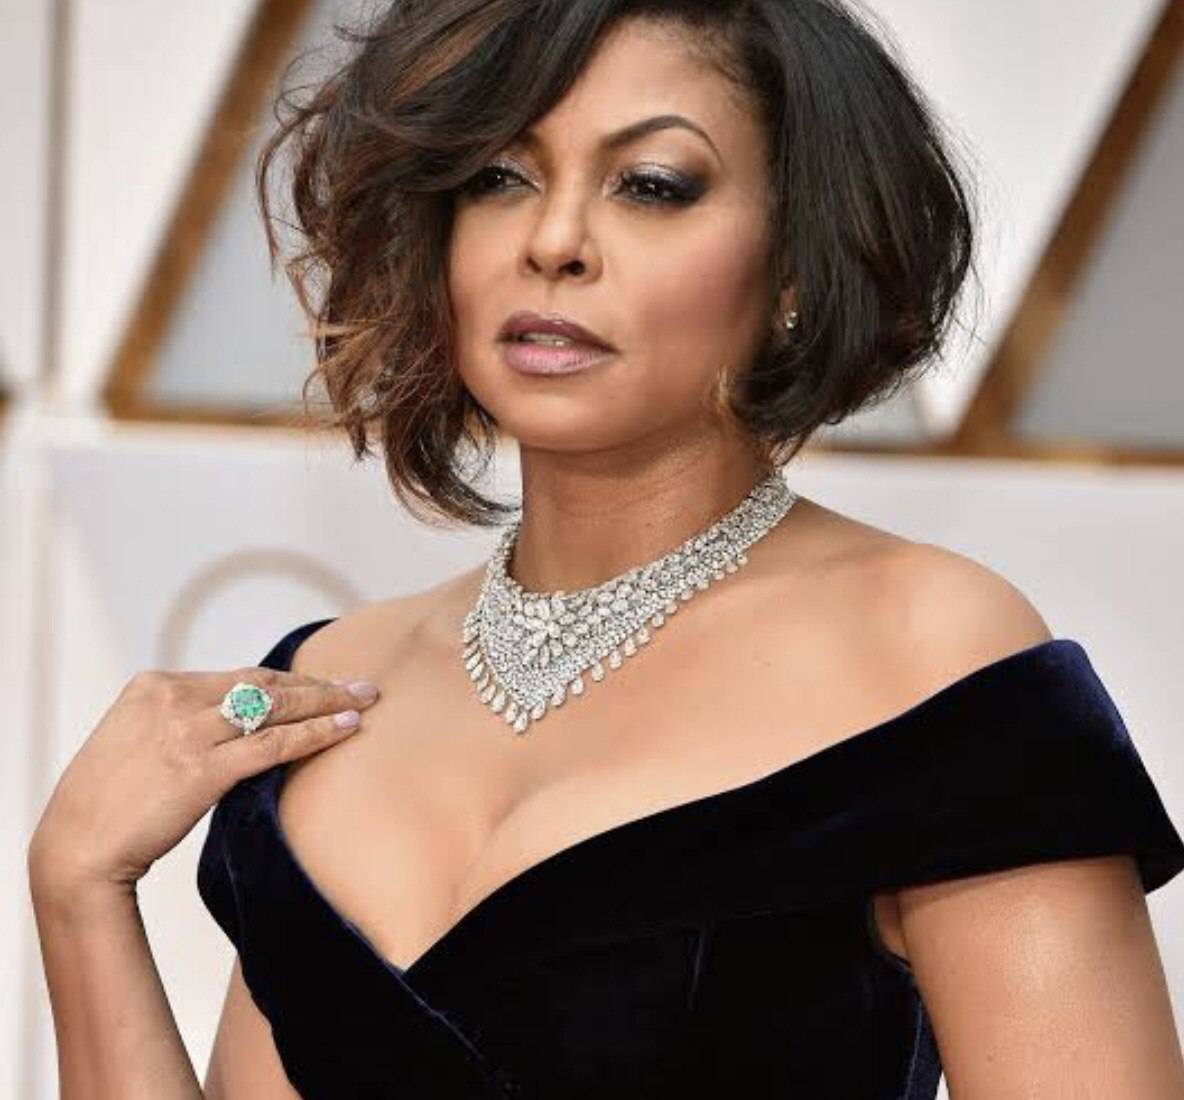 Taraji P. Henson on Her Mental Health After Opening Up About Past Suicidal Thoughts